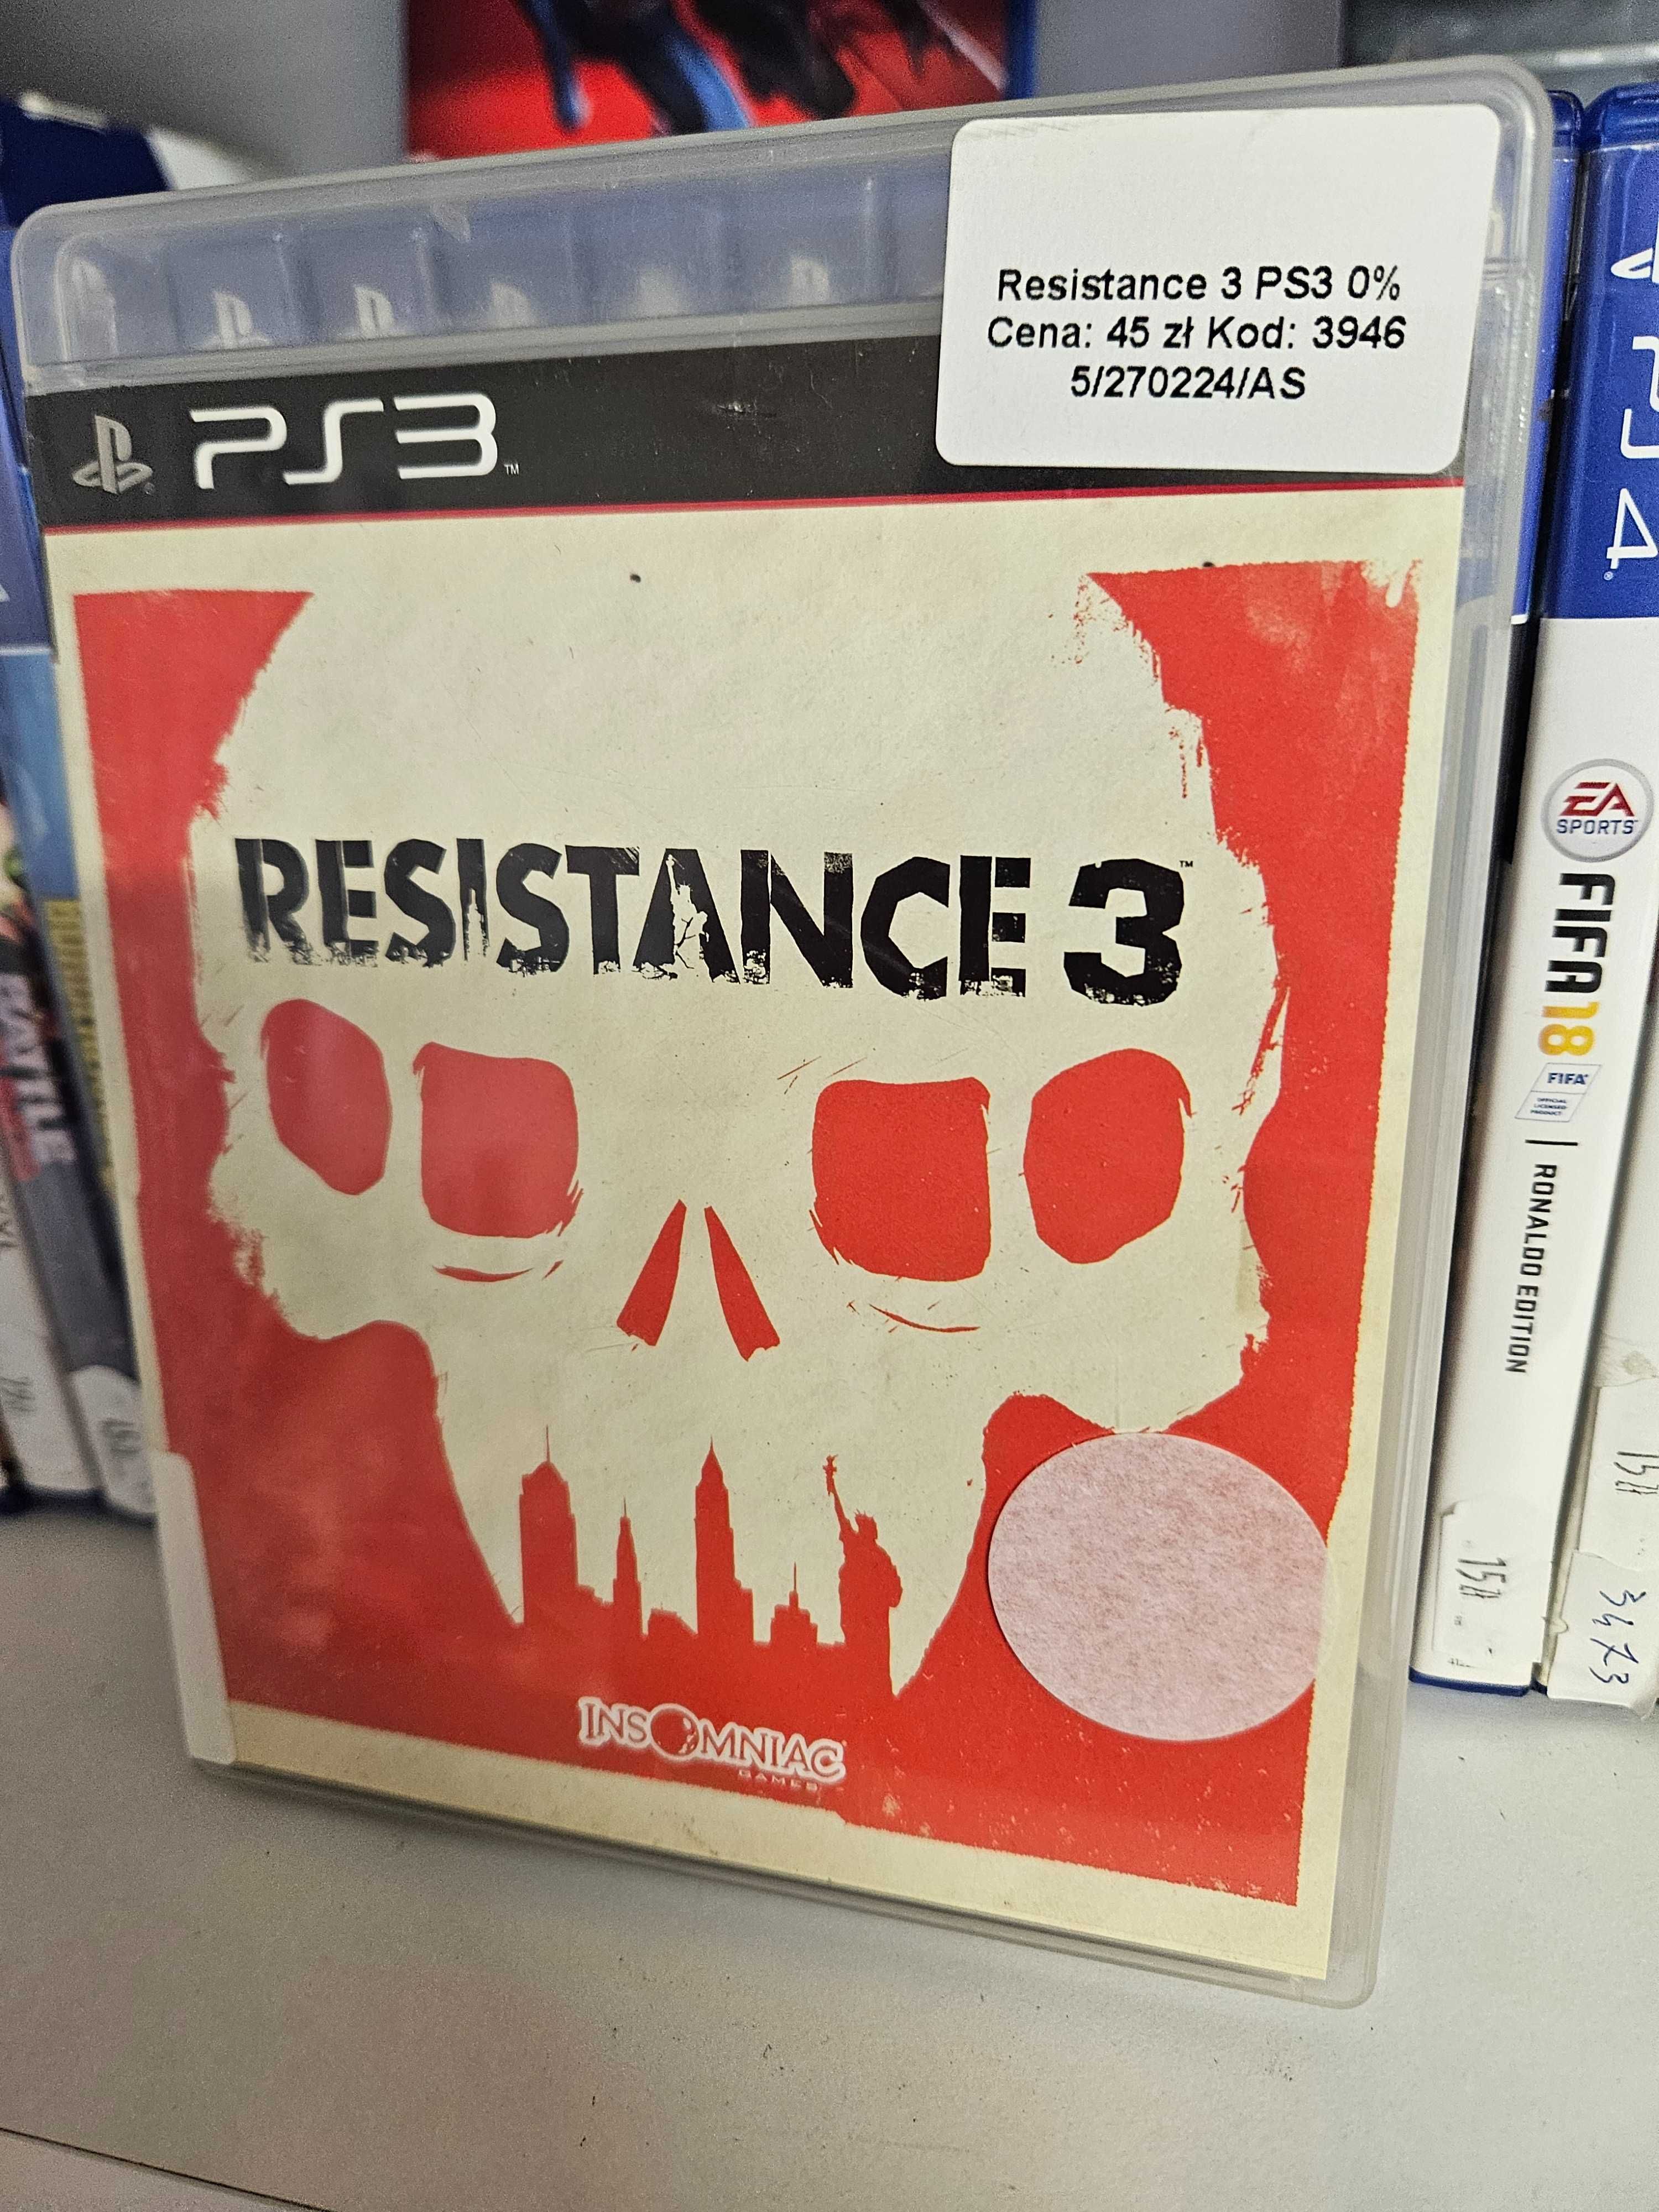 Resistance 3 PS3 - As Game & GSM - 3946